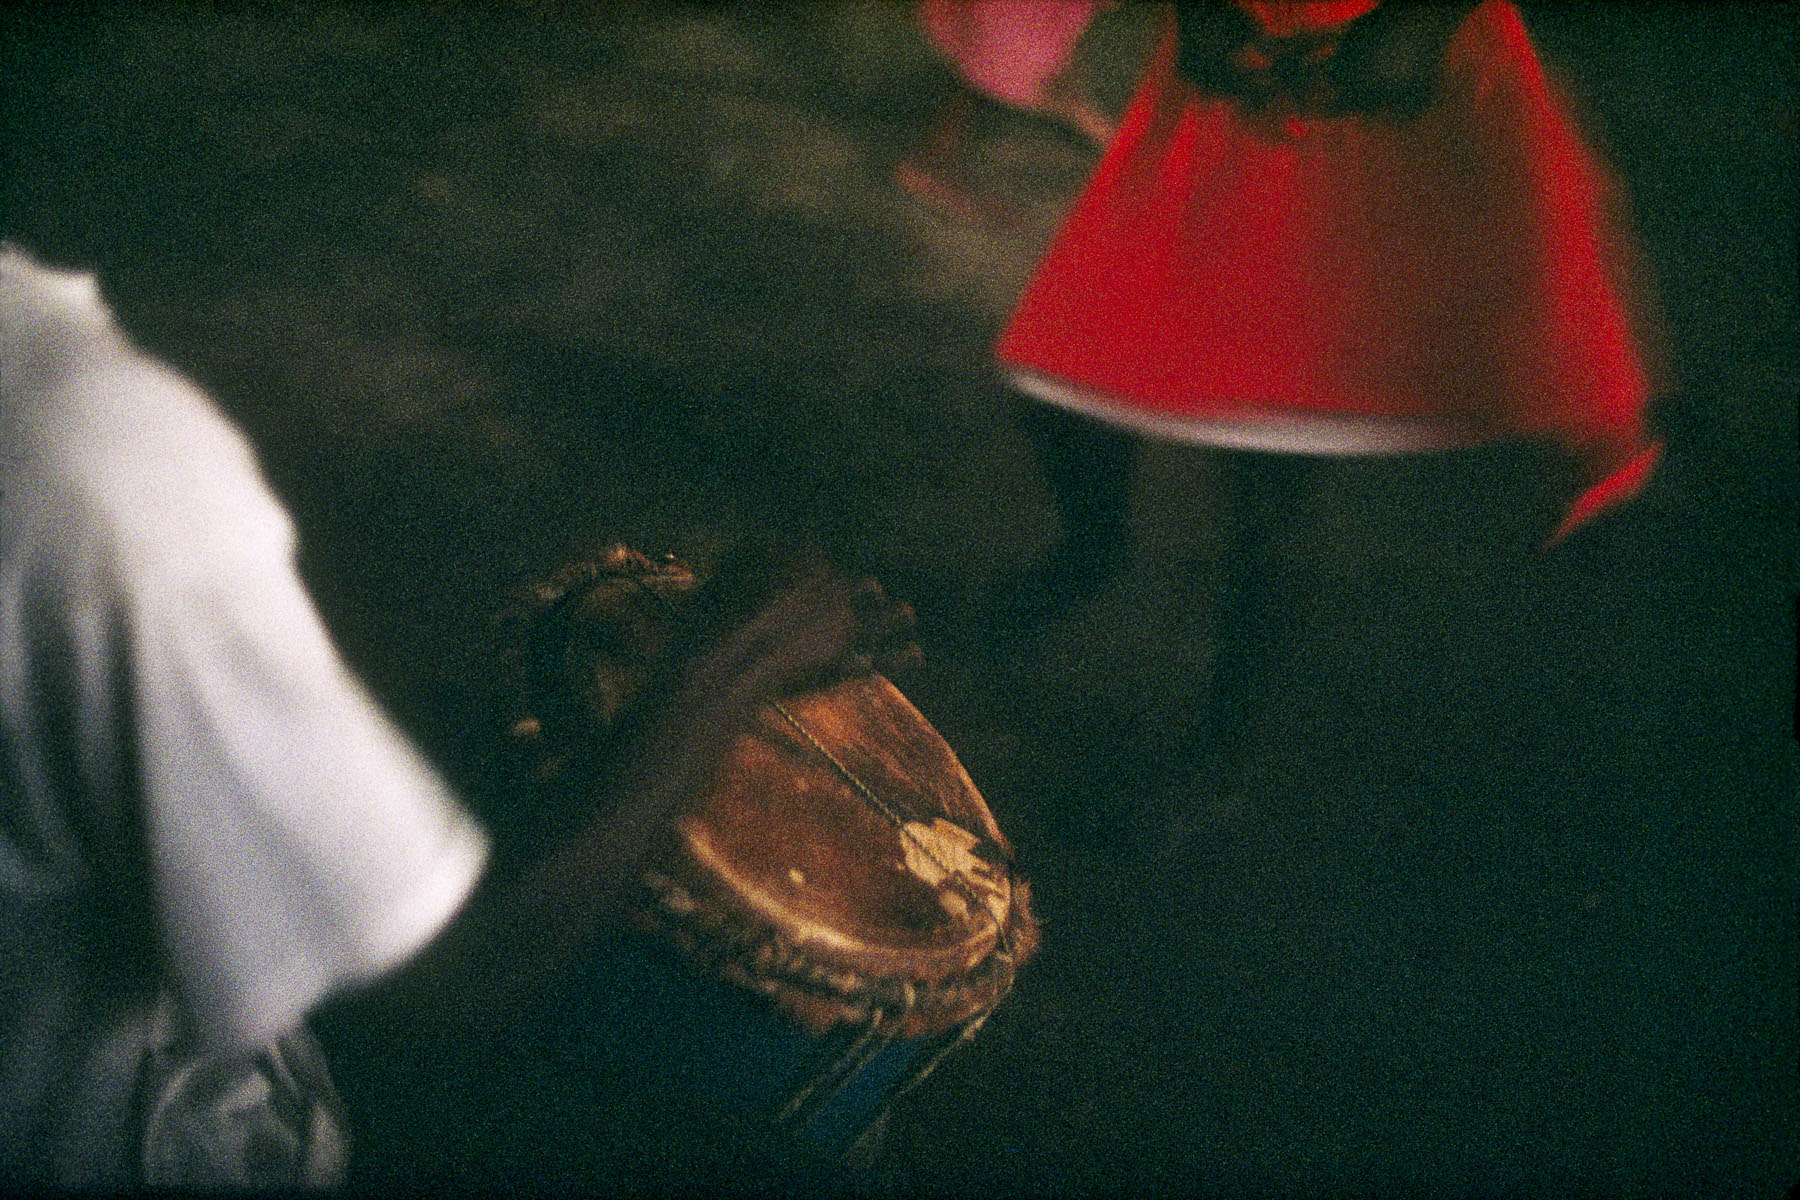 Dance and prayer during Twelfth Nigh in January 1997